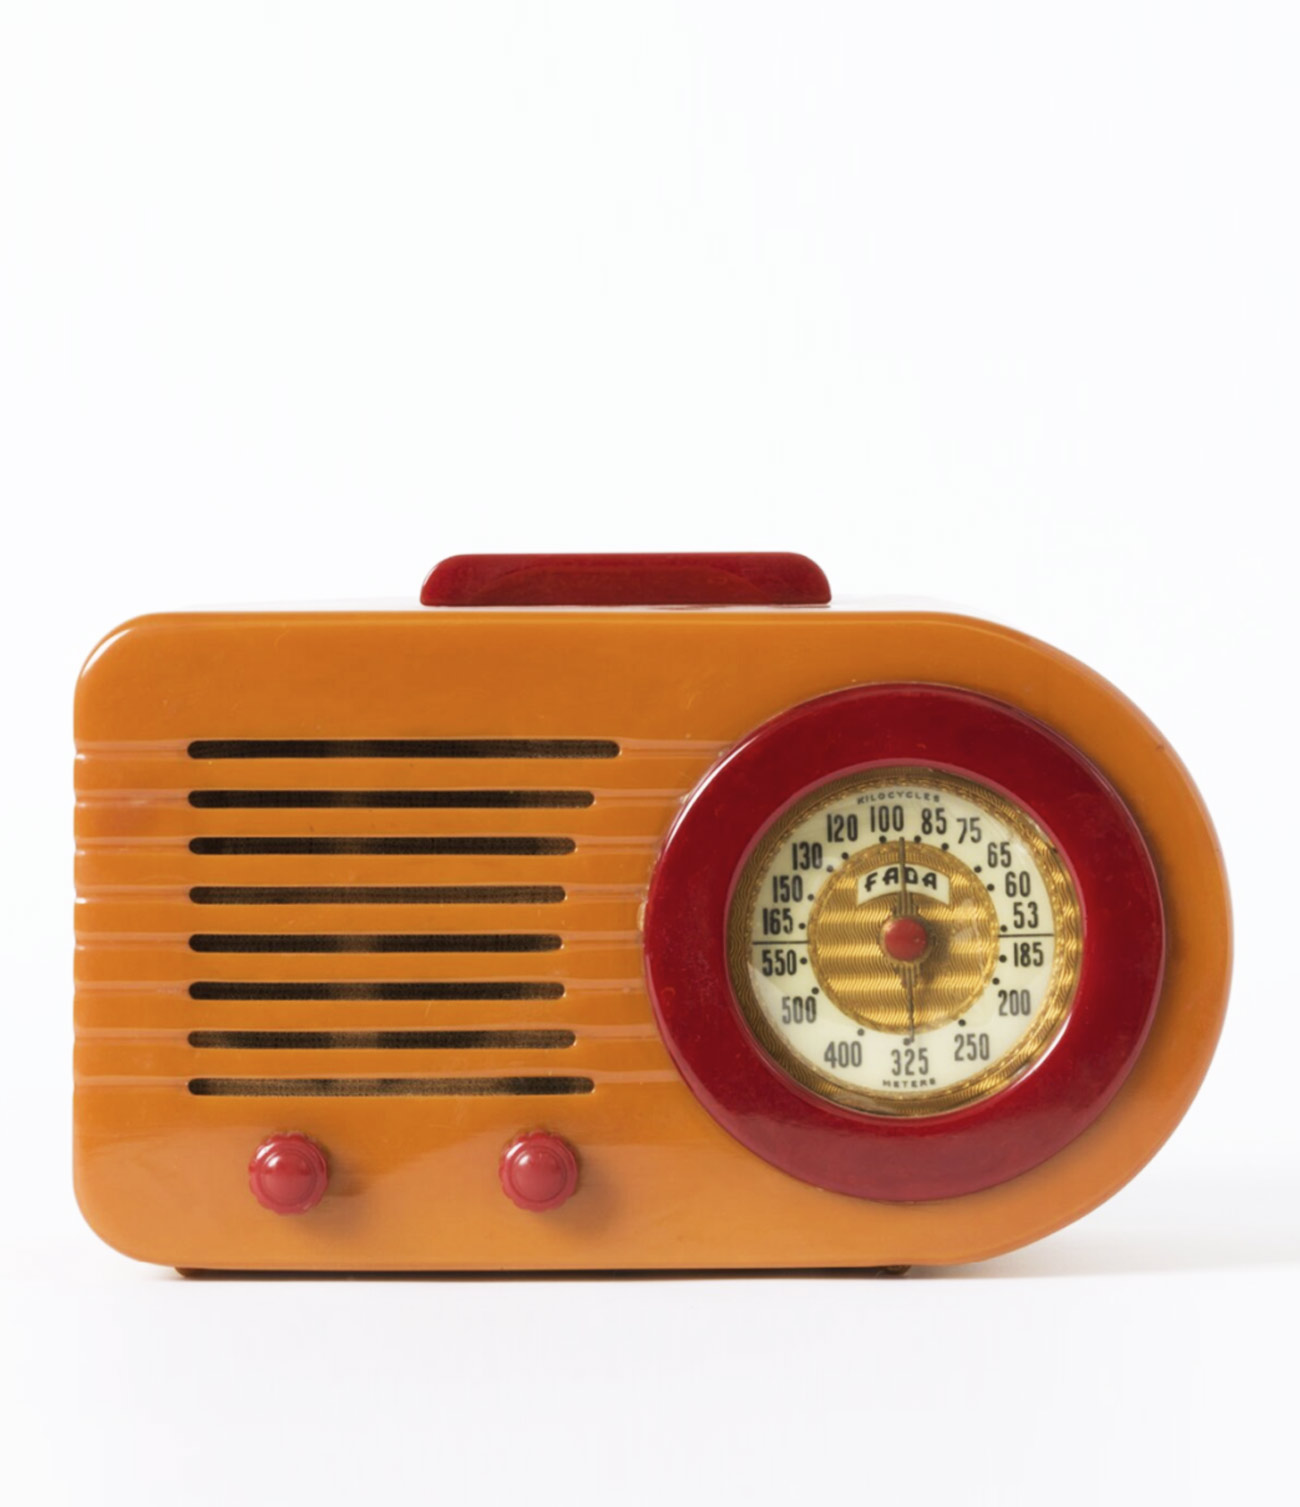 You can see a radio. It is made of plastic with an older, round frequency display. The display is framed in red. The handle and buttons are also red. The housing is orange.